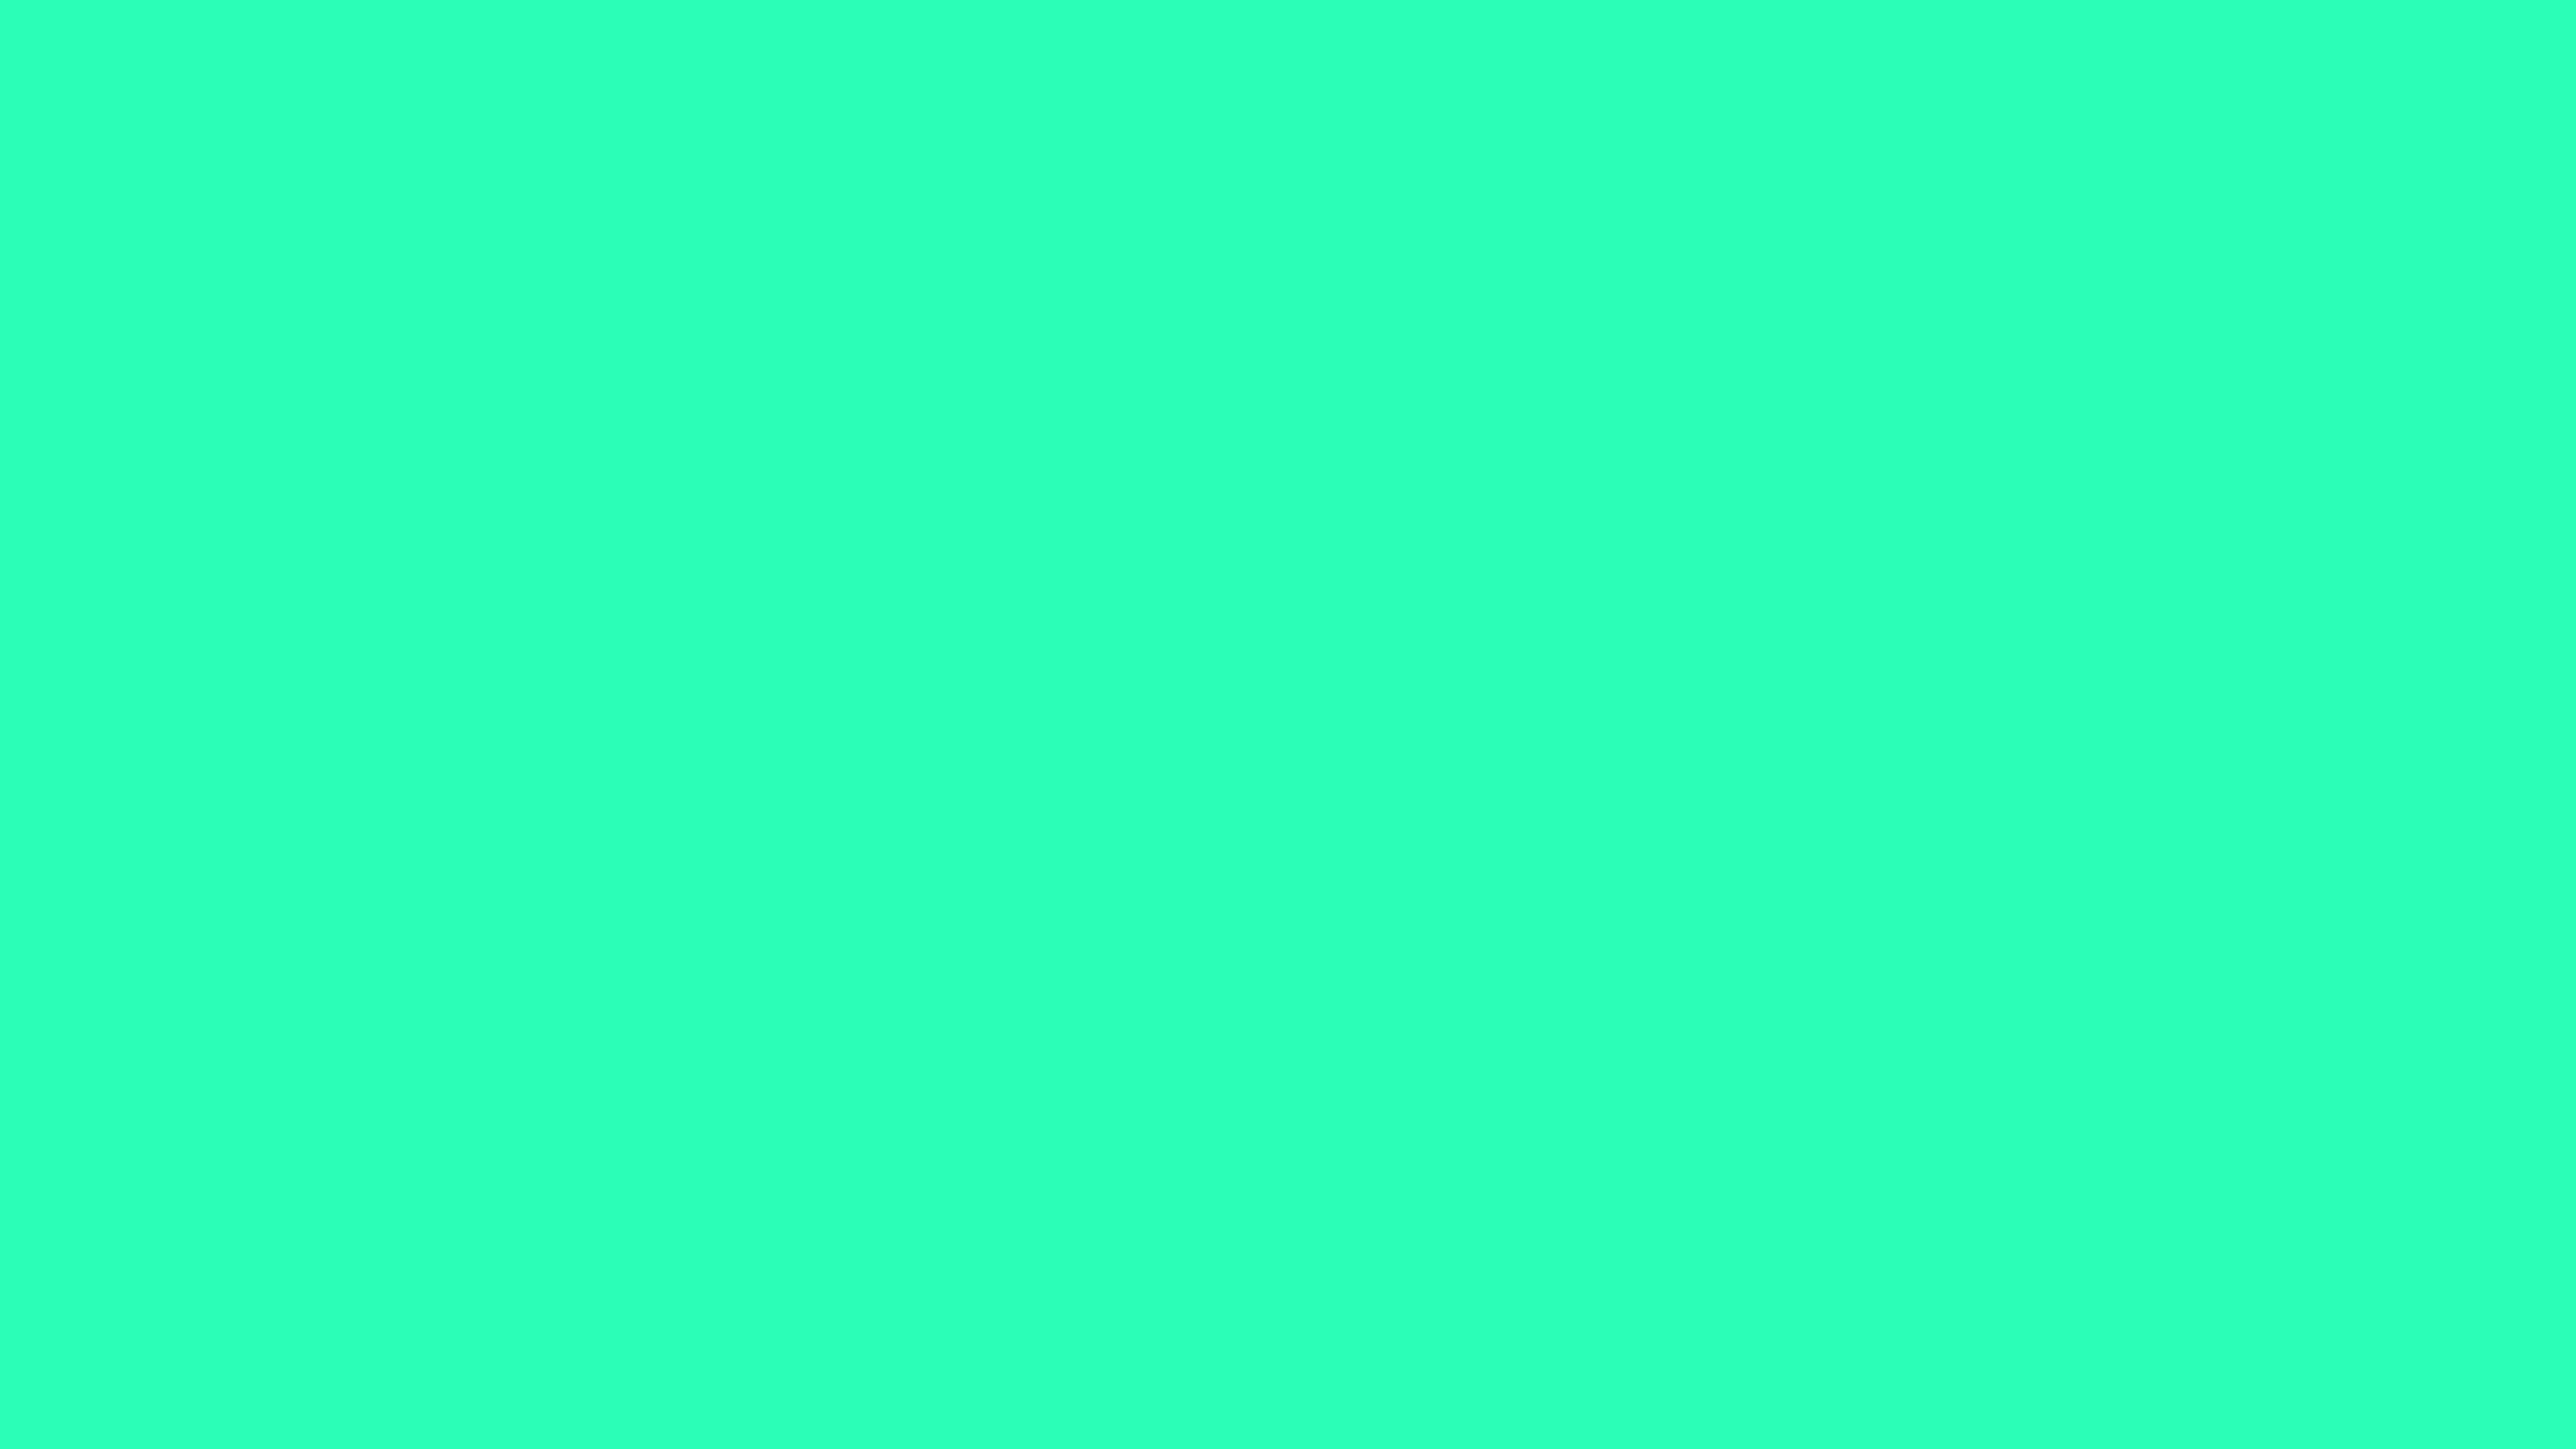 https://www.icolorpalette.com/download/solidcolorimage/2afeb7_solid_color_background_icolorpalette.png